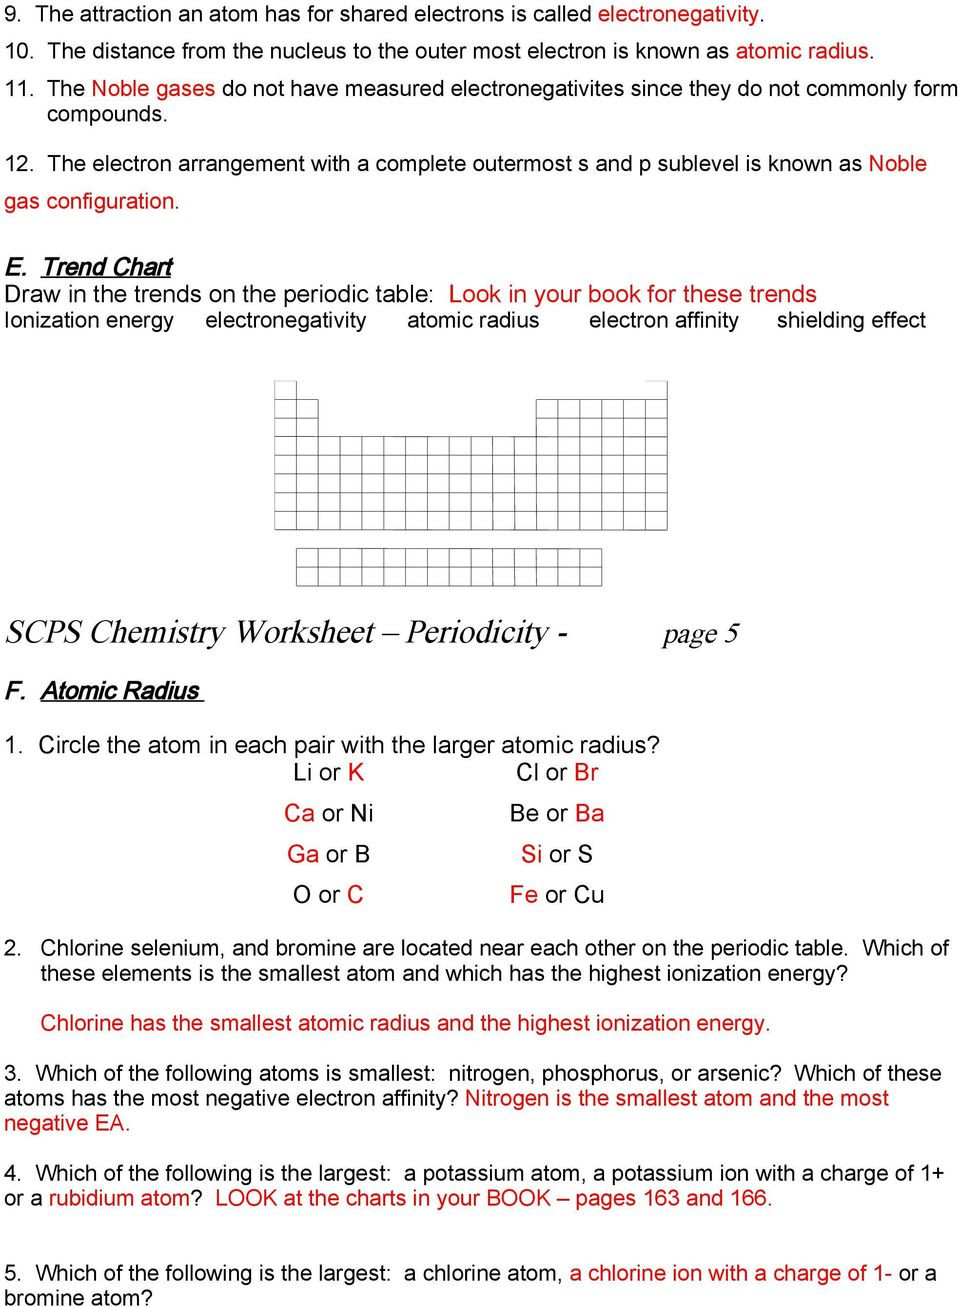 Periodic Trends Worksheet Answers Scps Chemistry Worksheet Periodicity A Periodic Table 1